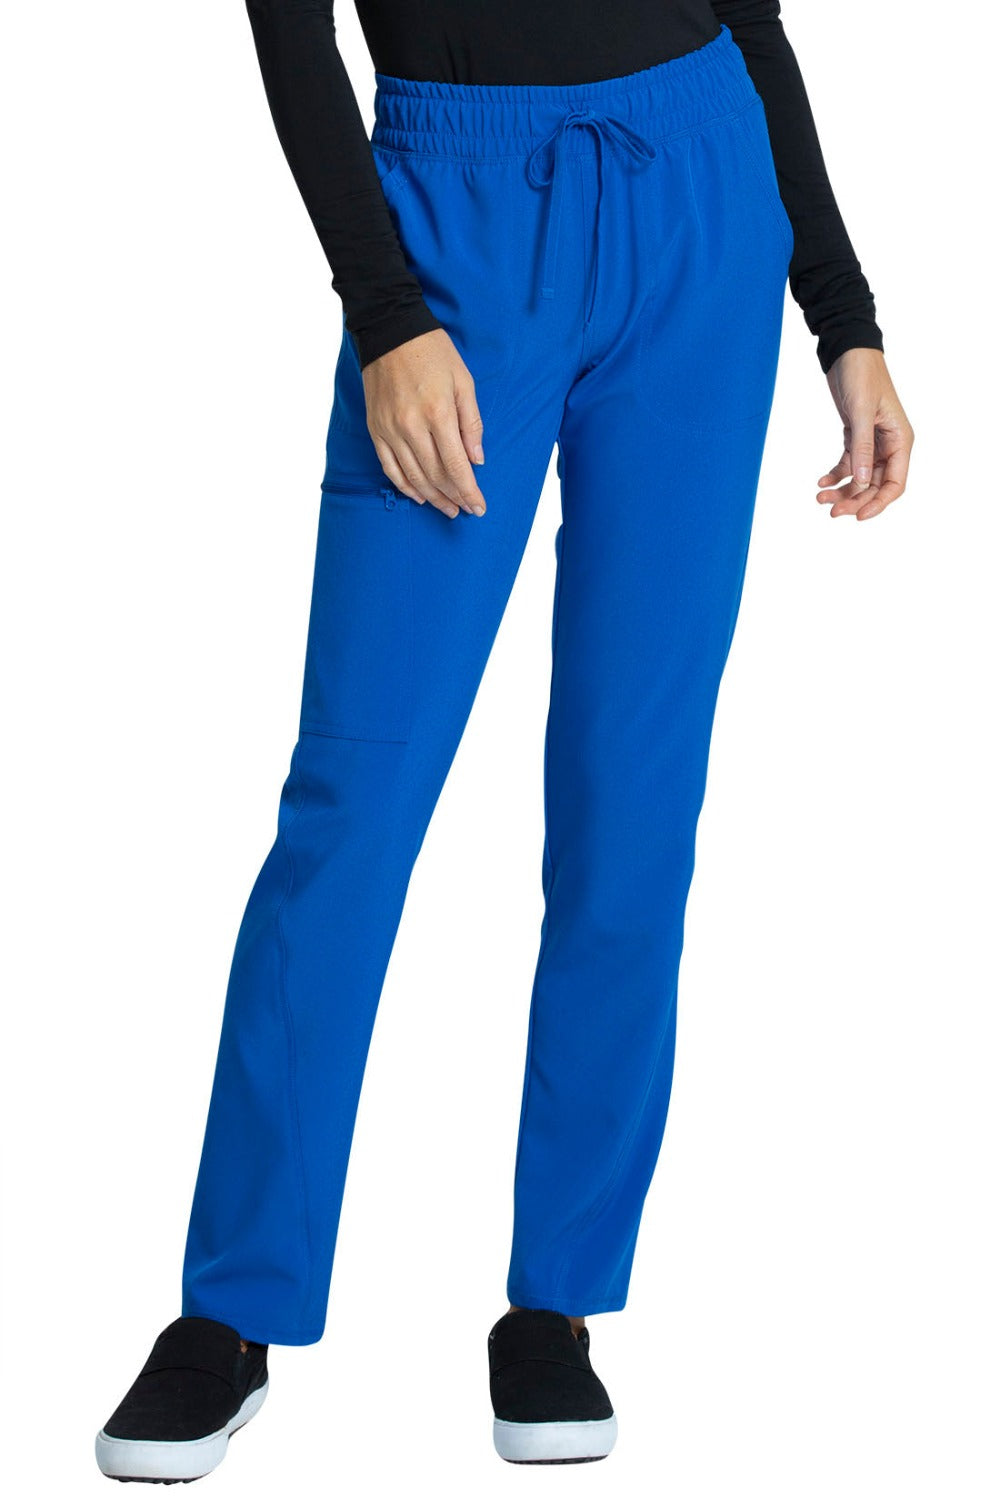 Cherokee Allura Tall Scrub Pant Mid Rise Tapered Leg Drawstring in Royal at Parker's Clothing and Shoes.